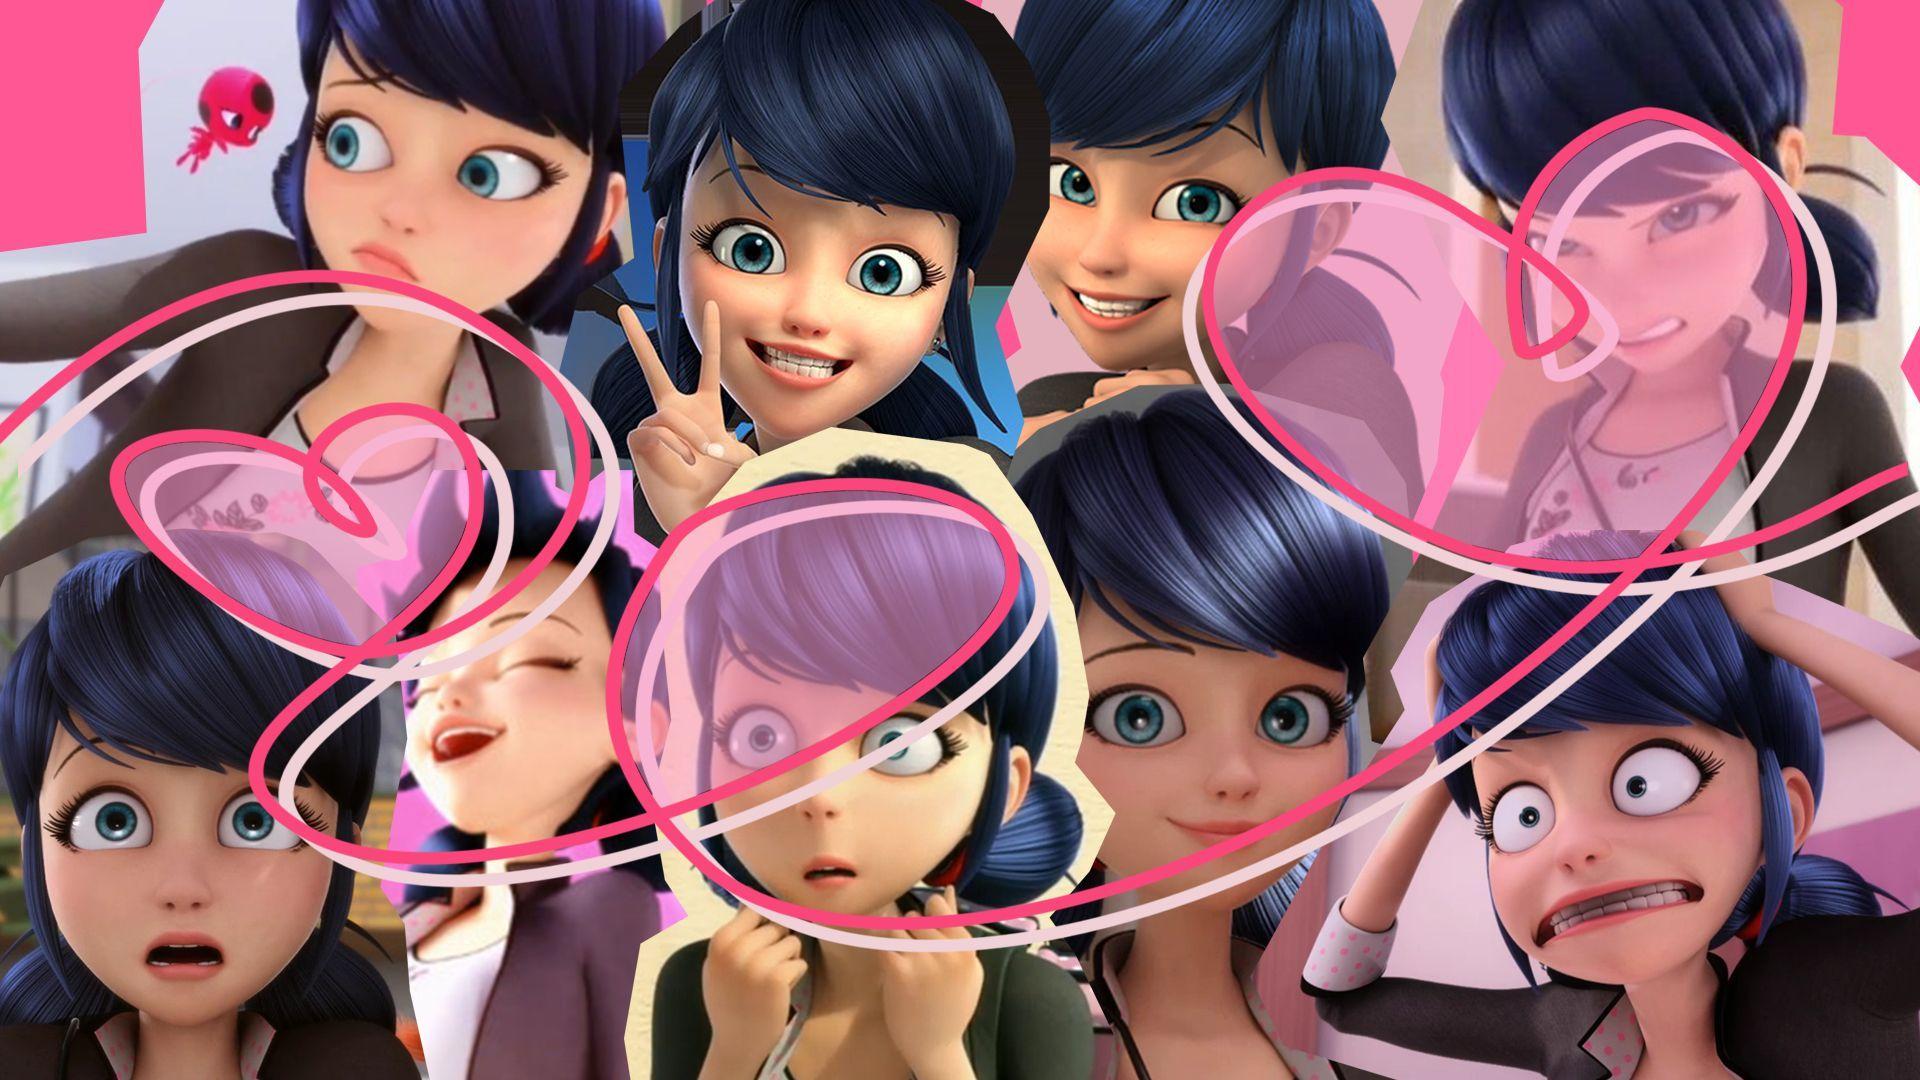 I bet Adrien has a Ladybug version of this on his home screen. After